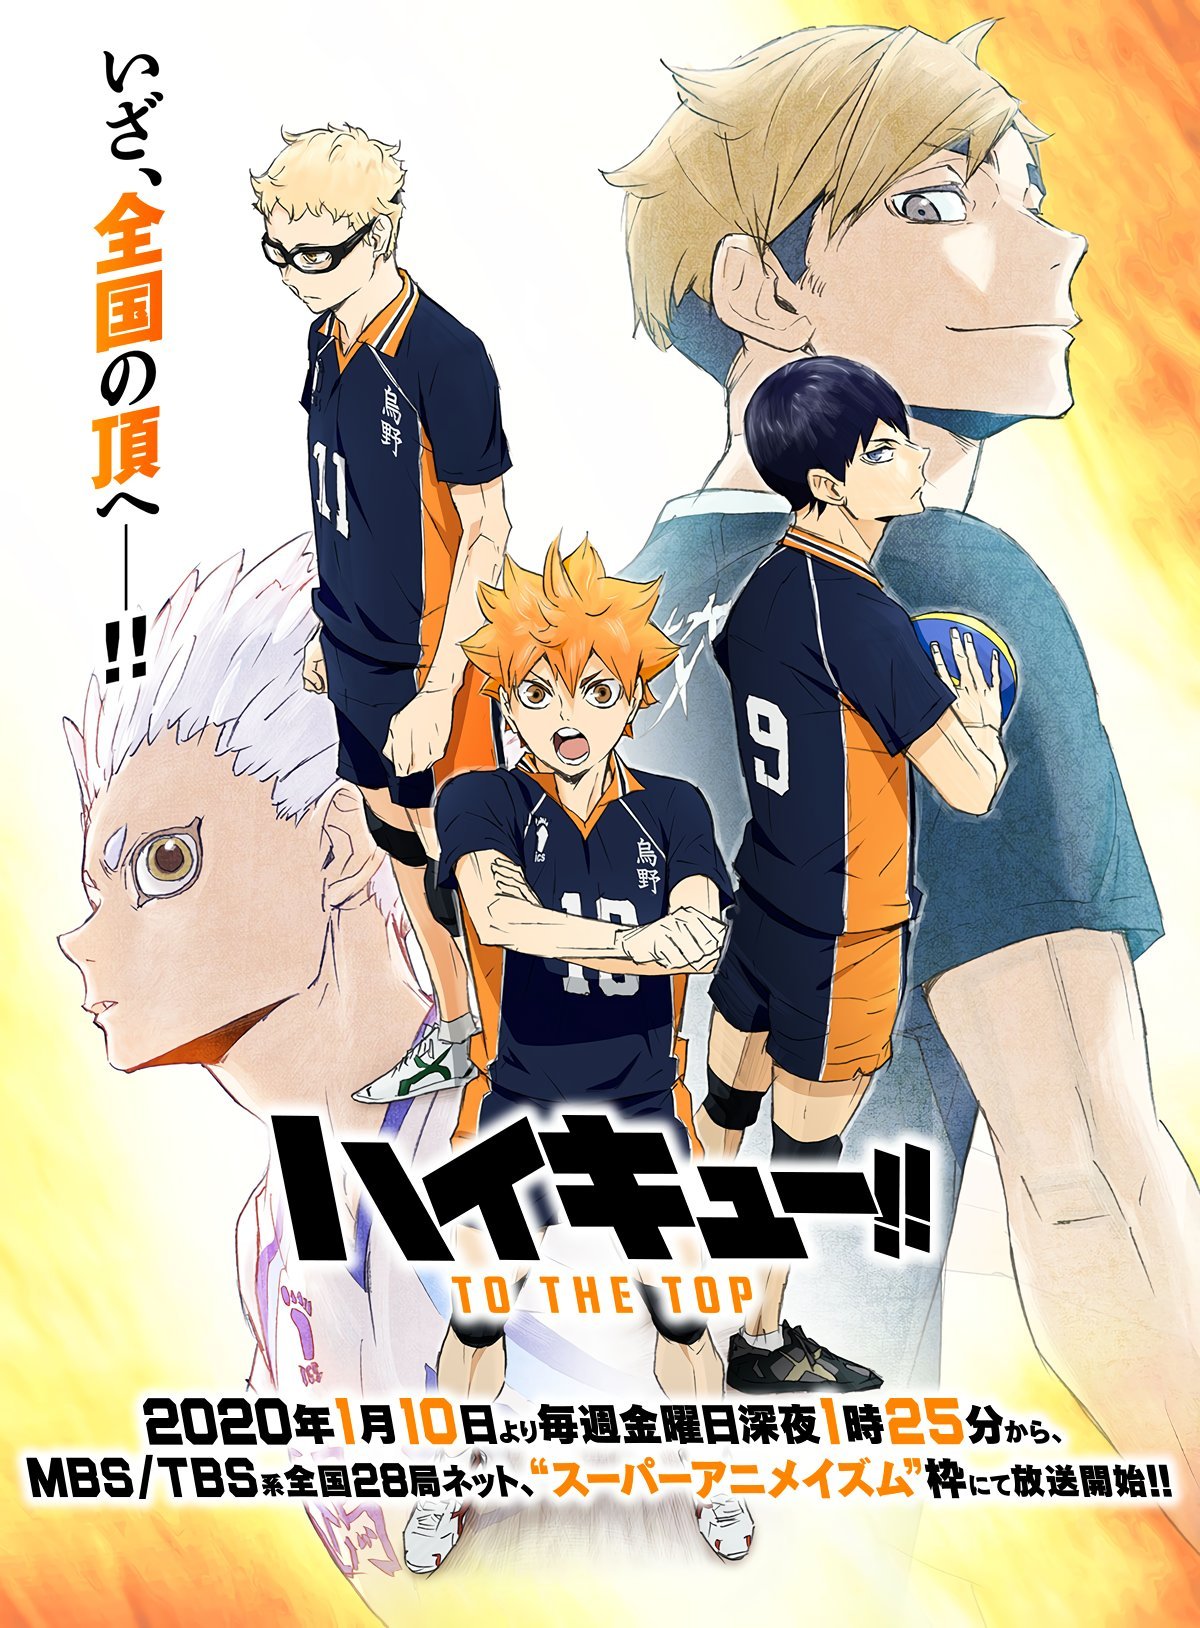 Haikyuu Season 4, OVA episodes Land vs Sky and The Volleyball Way confirmed  for winter 2020